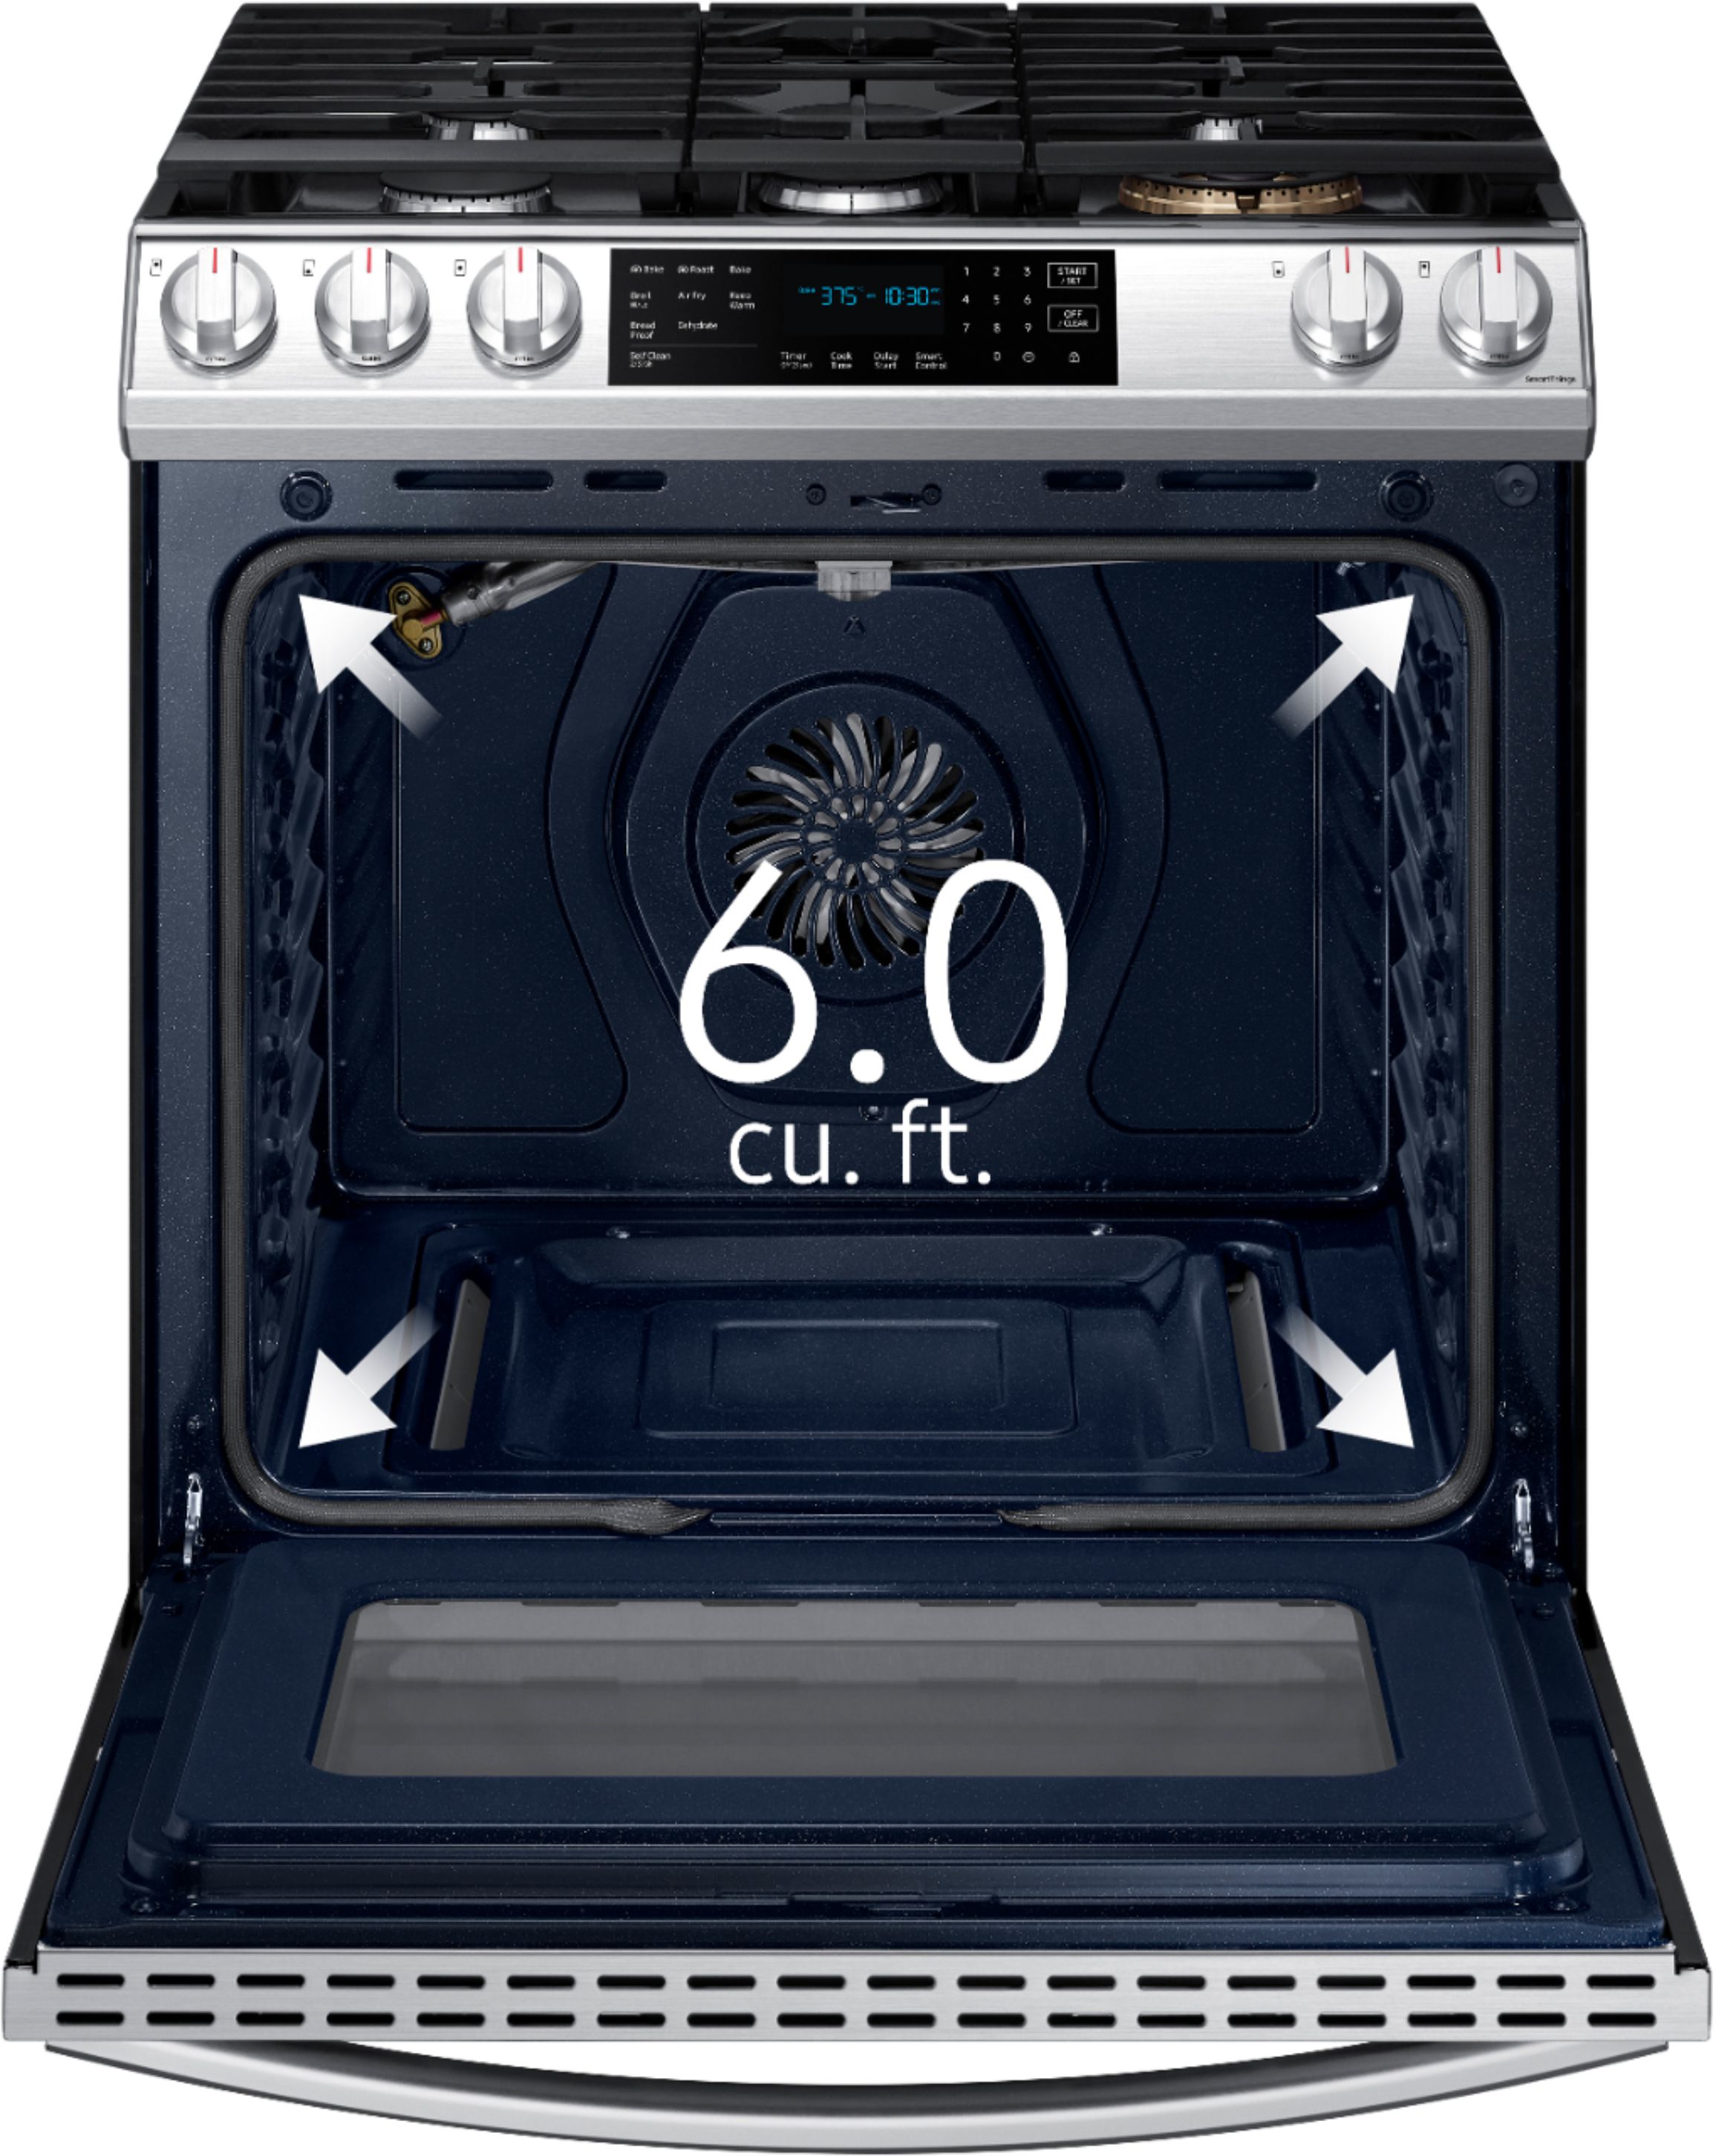 Samsung - 6.0 cu. ft. Front Control Slide-In Gas Convection Range with Air Fry & Wi-Fi, Fingerprint Resistant